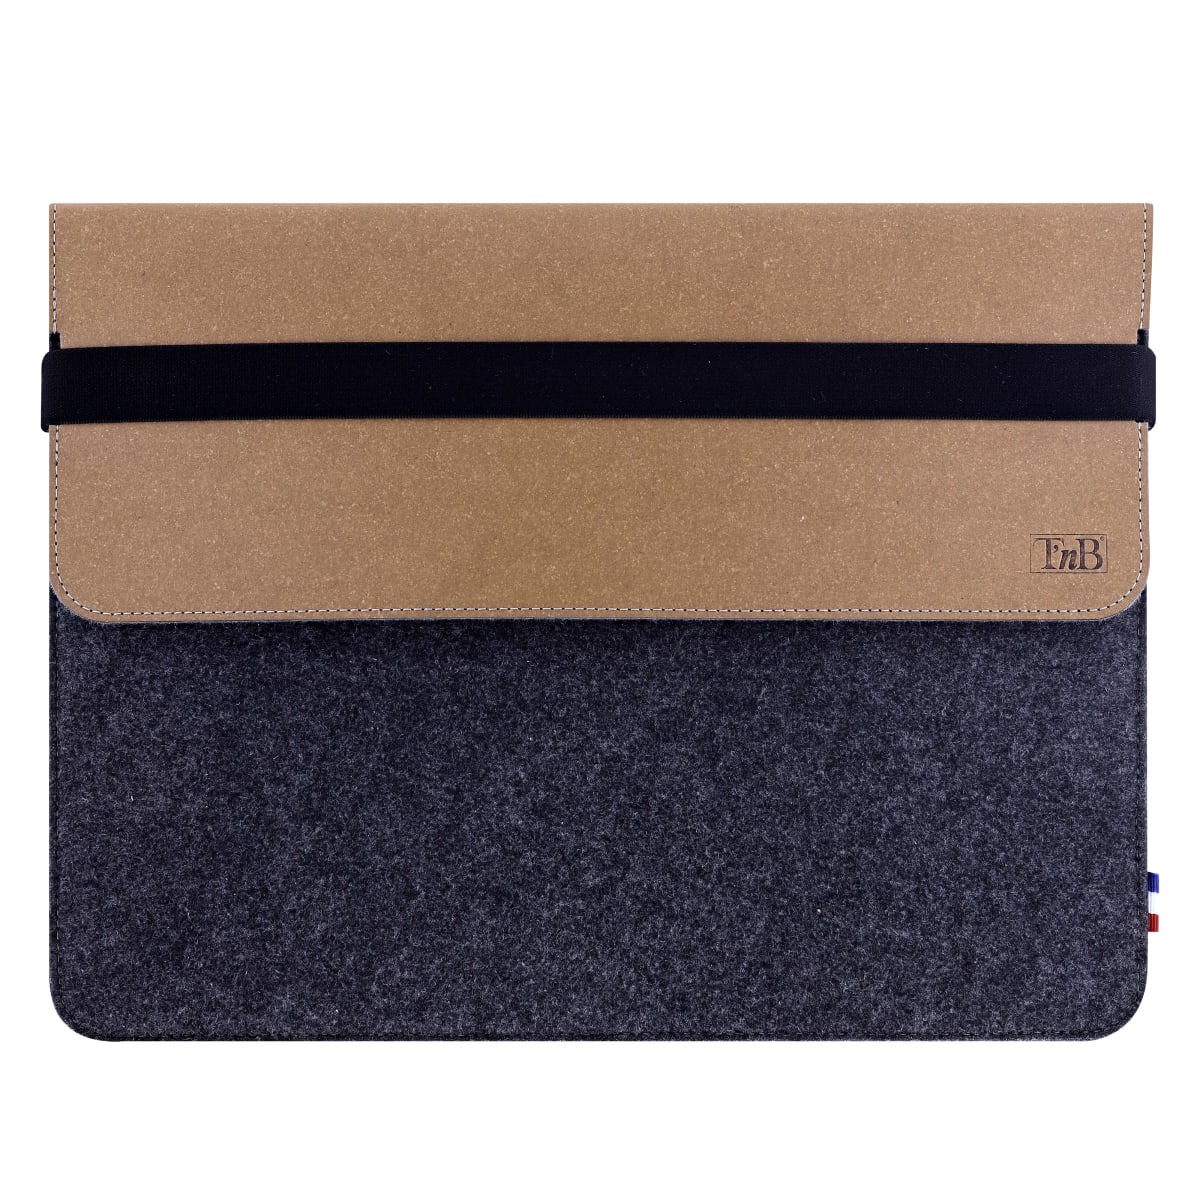 Eco-friendly French 13-14" laptop case in leather and felt - brown/grey